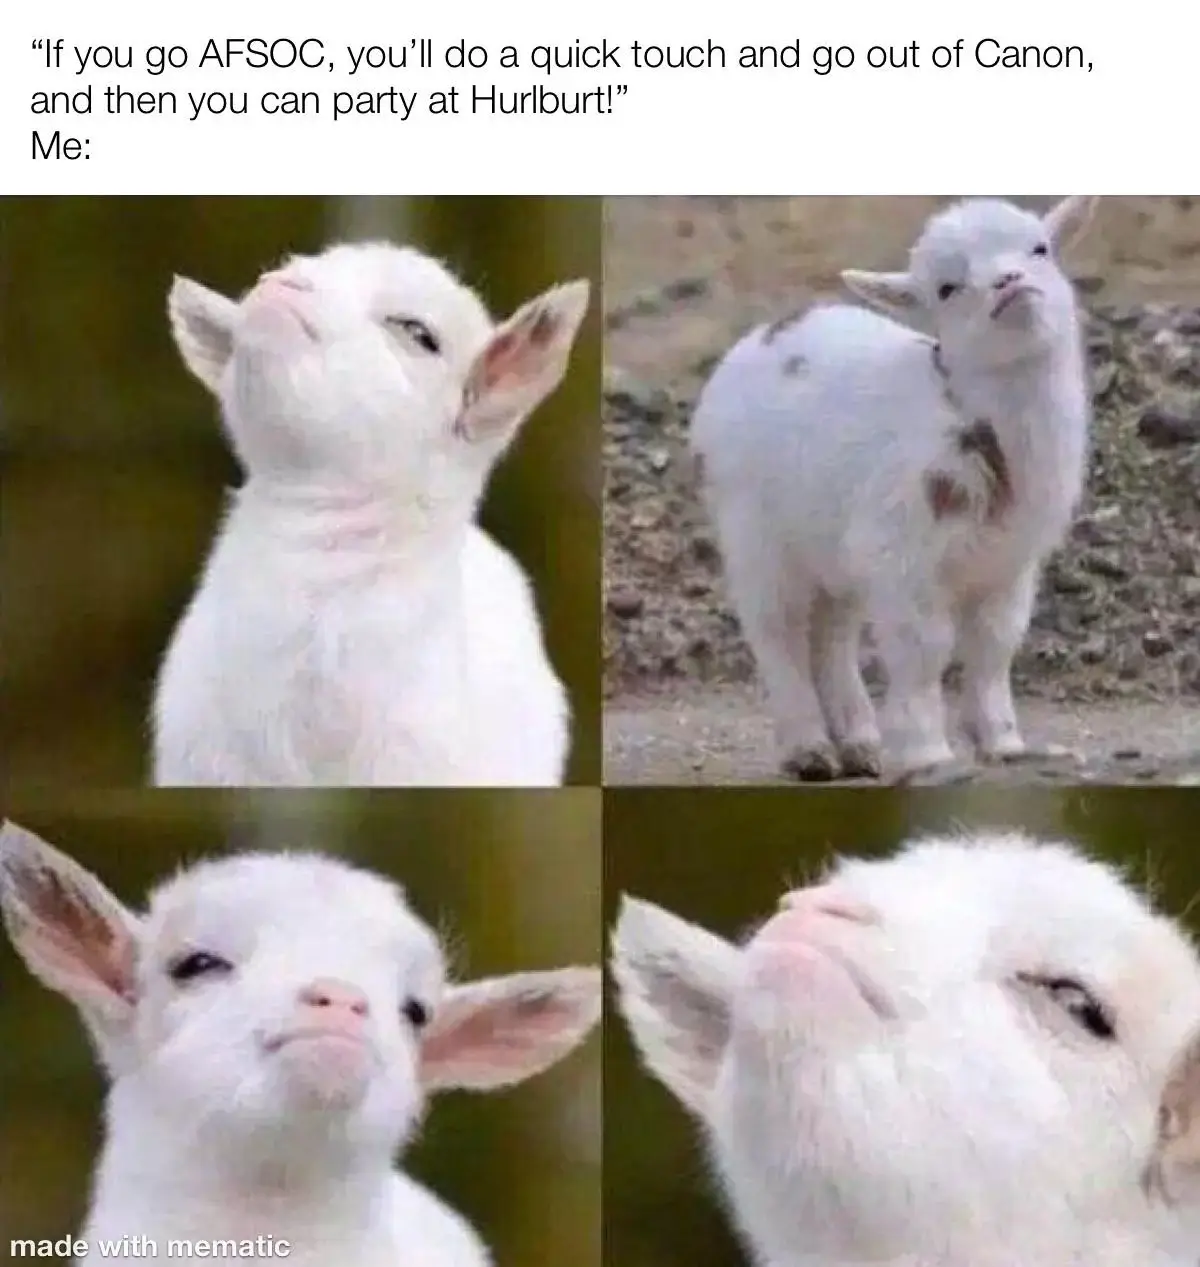 Meme of a baby goat making stubborn faces.